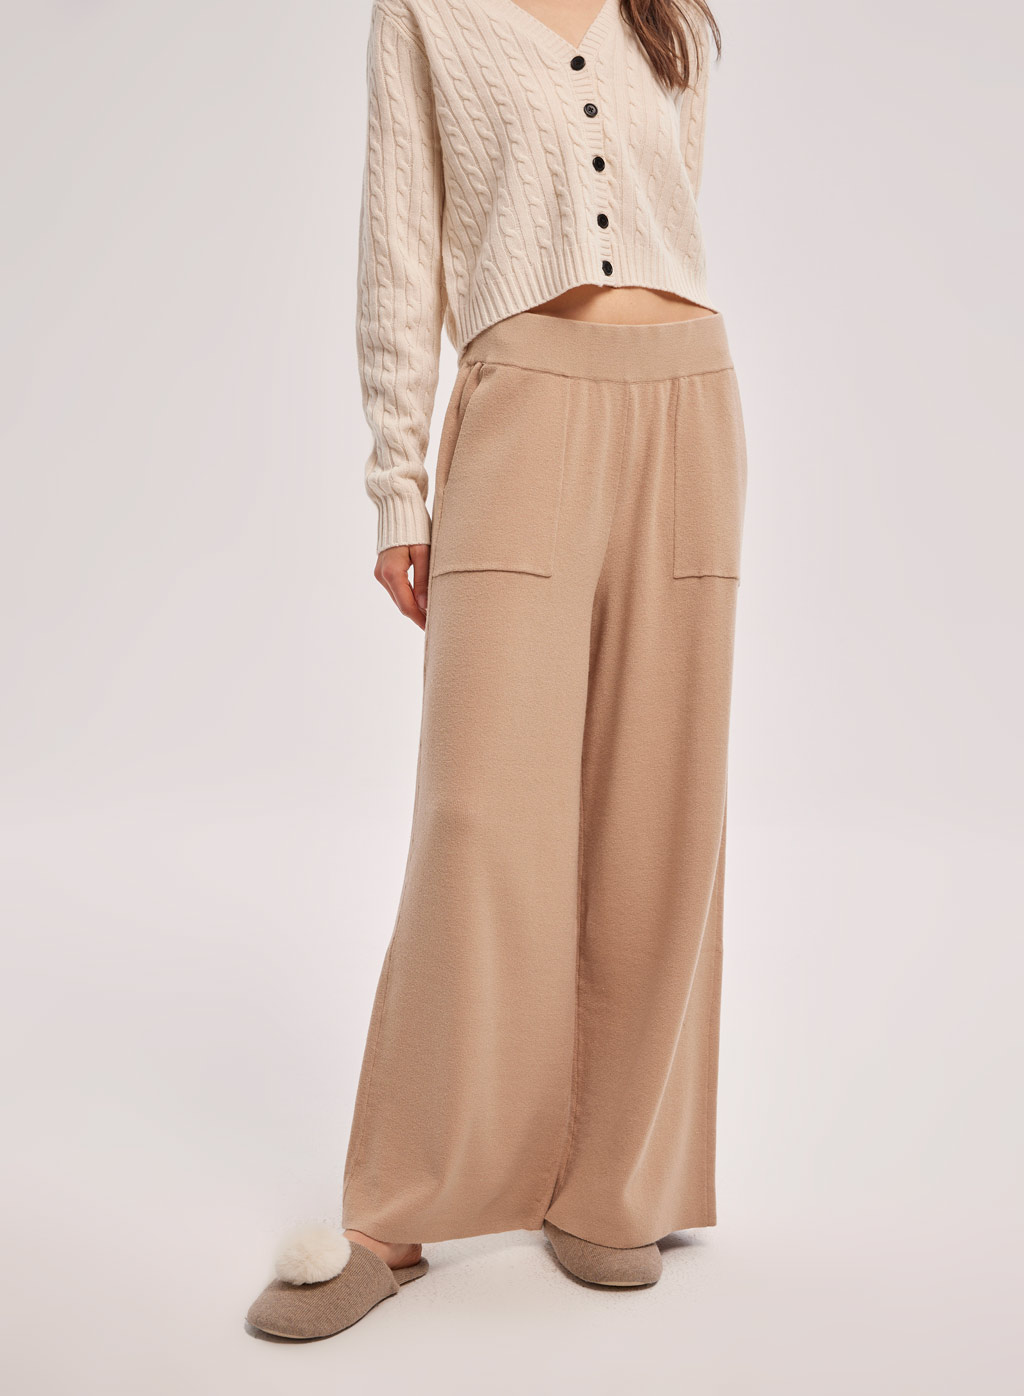 Loose Wide Leg Knit Pants Beeswax 2